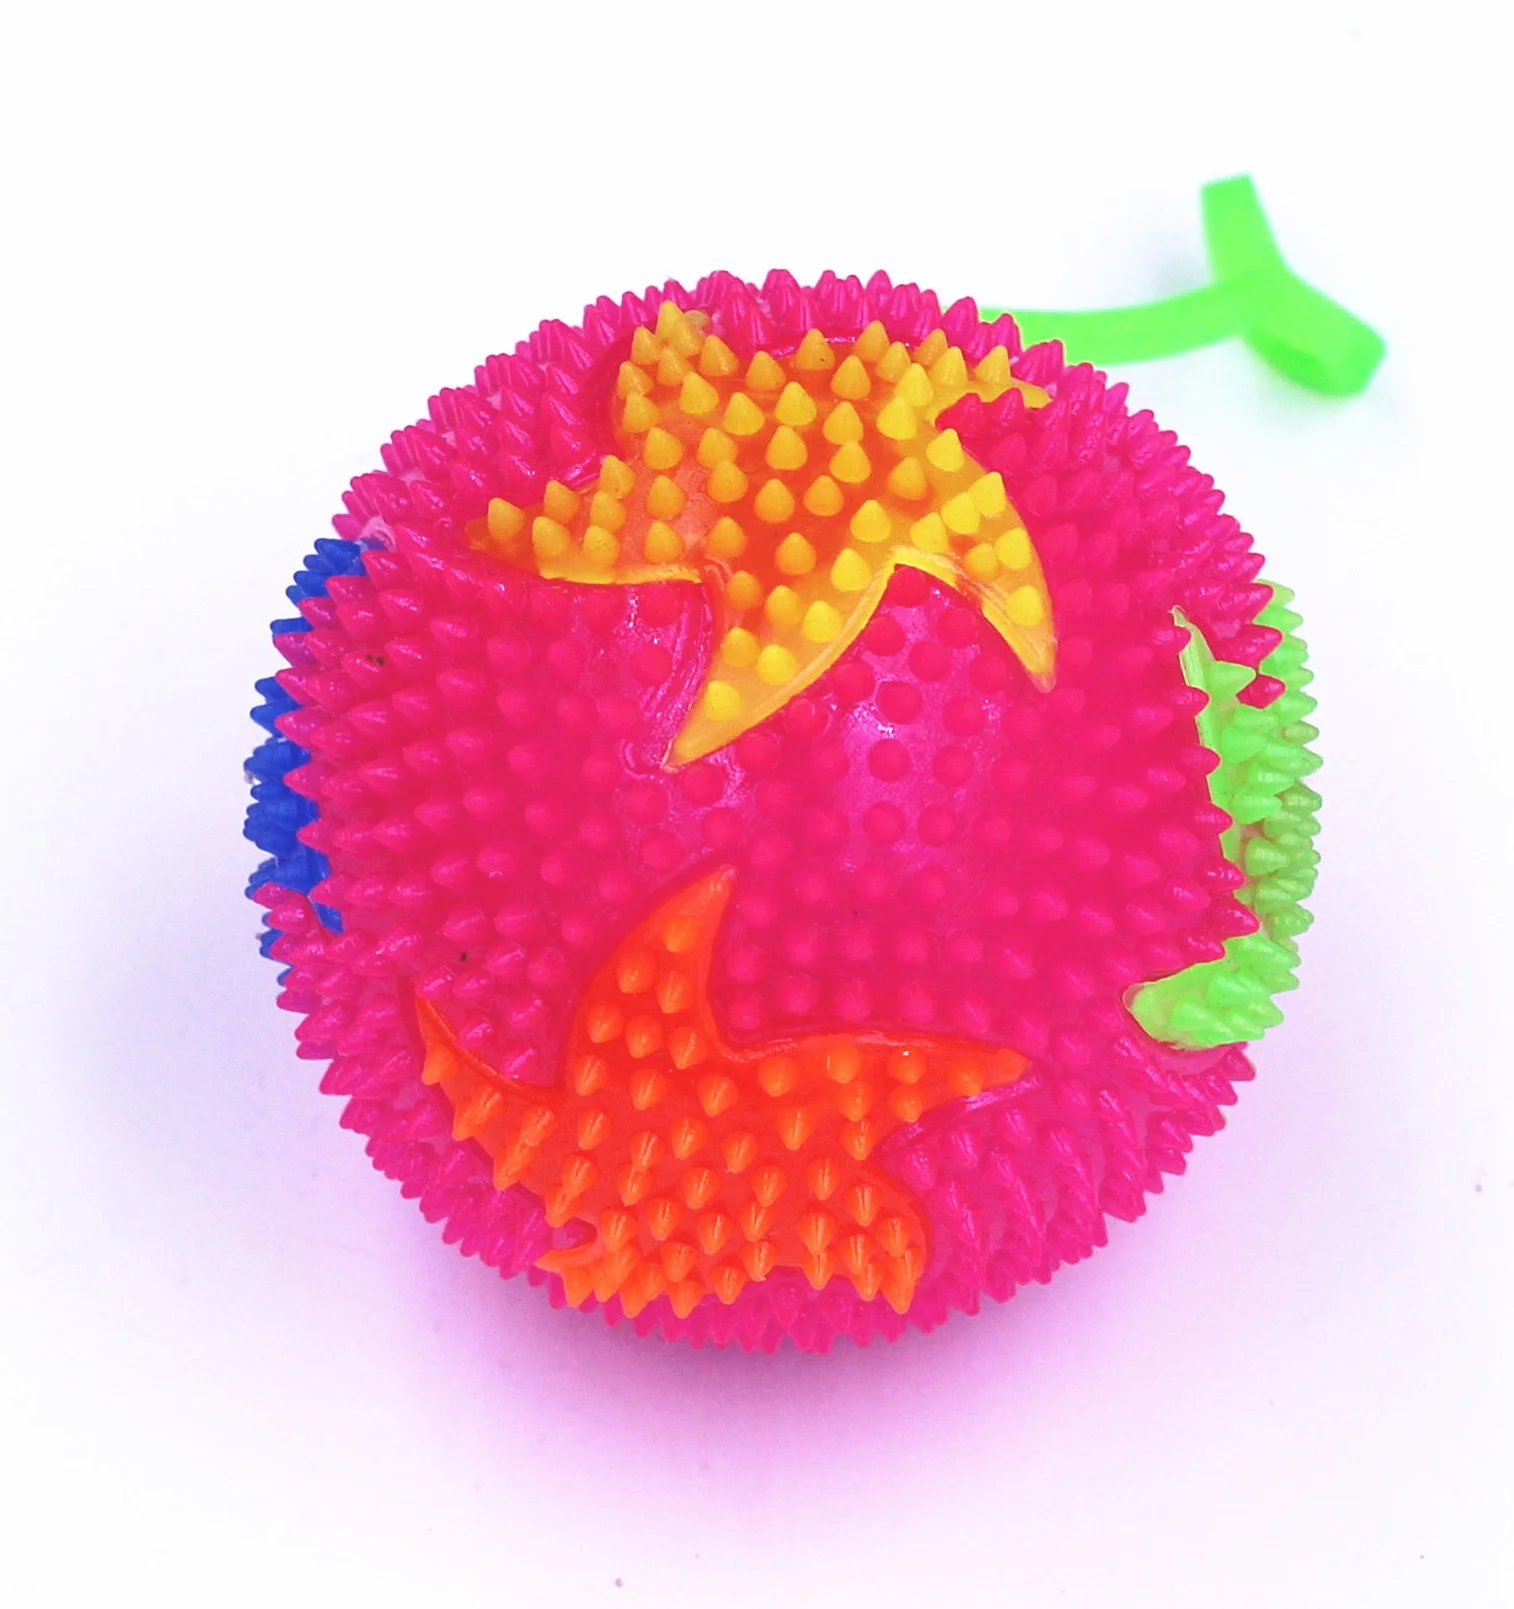 New Colorful Flashing Bounce Balls Toy Novelty Windmill LED Light Spike Stress YoYo Balls for Adult Kids Outdoor Toy